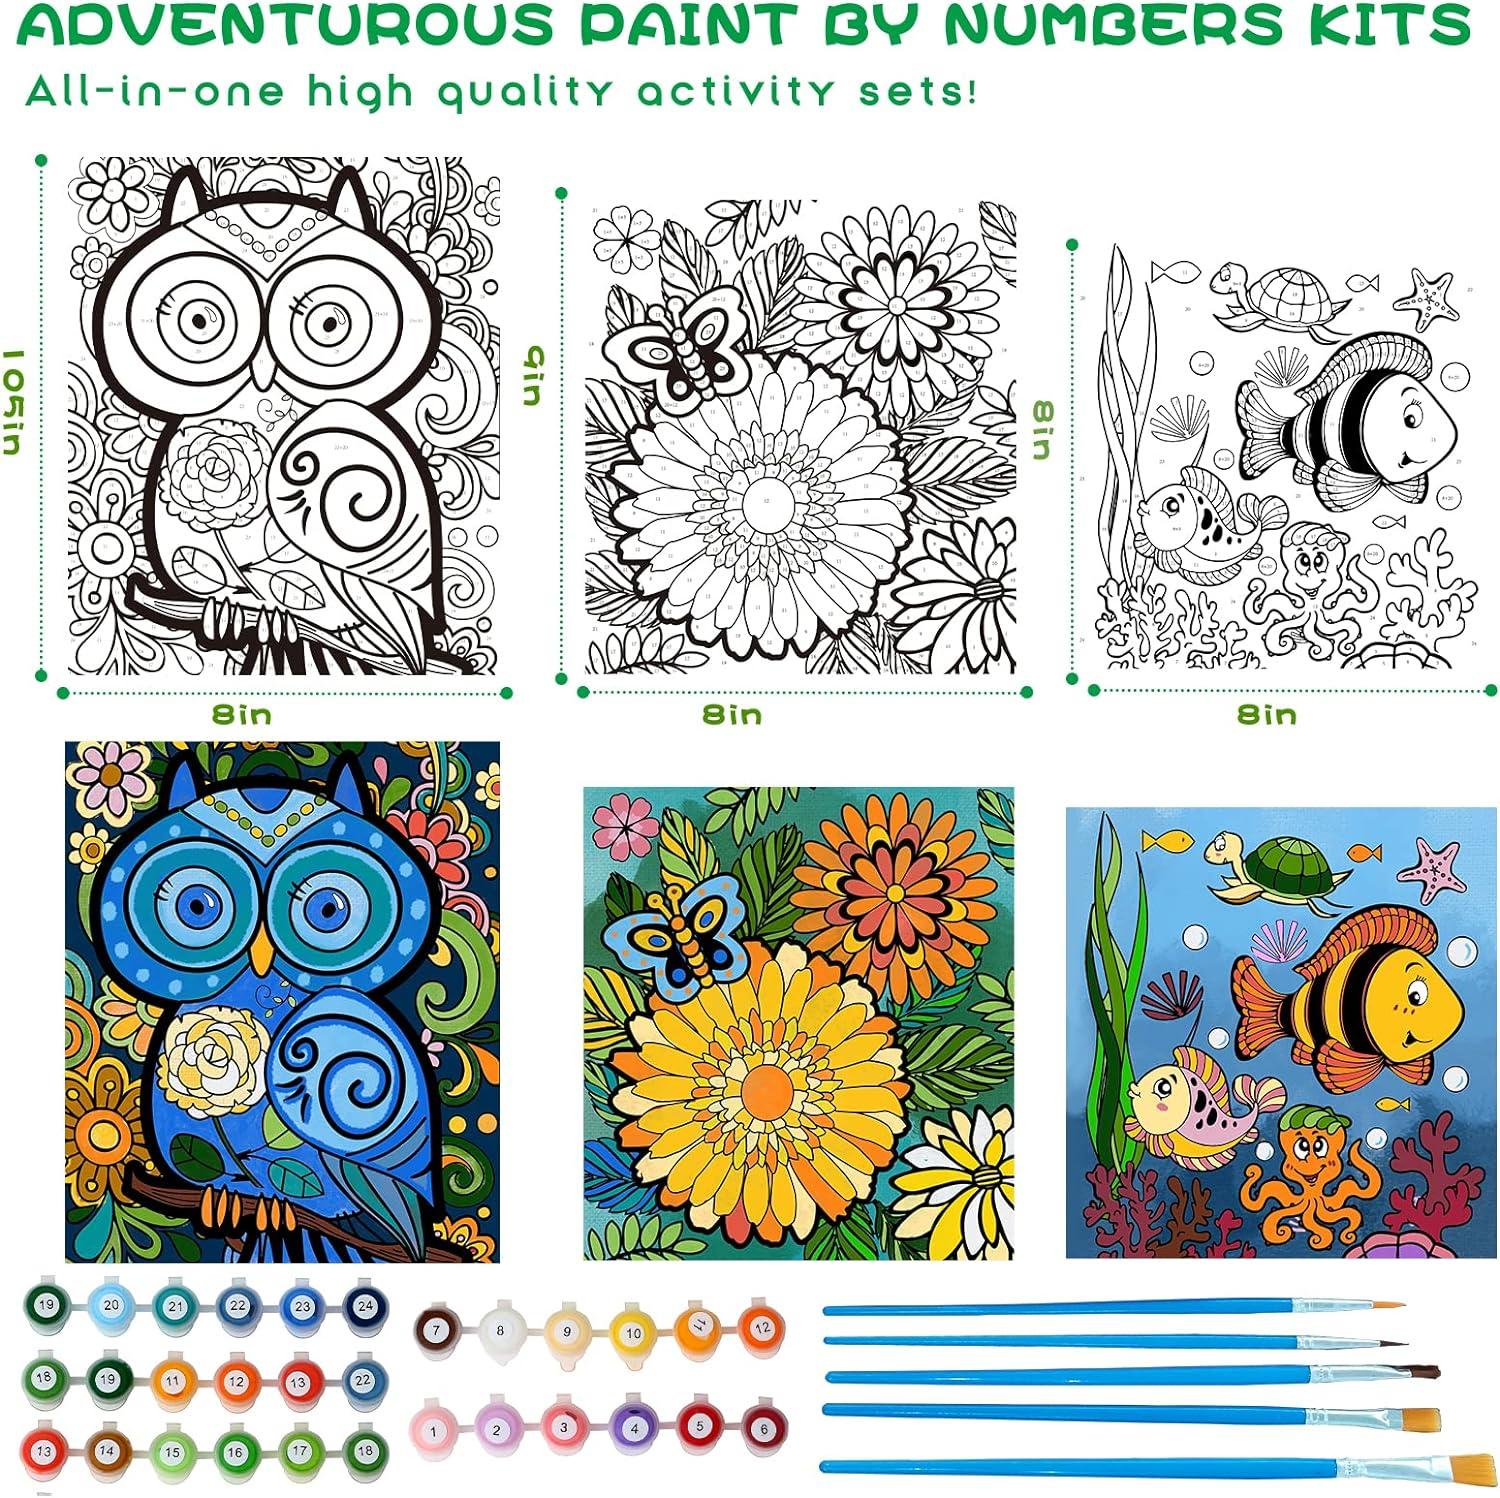 Nariolar Paint by Numbers for Kids Ages 8-12 with 7X9.5 inch Pre-Printed  Cardboard 12 Acrylic Paint Pots and 3 Painting Brushes Craft Gift Room  Decor for Children (Artistic Unicorn)